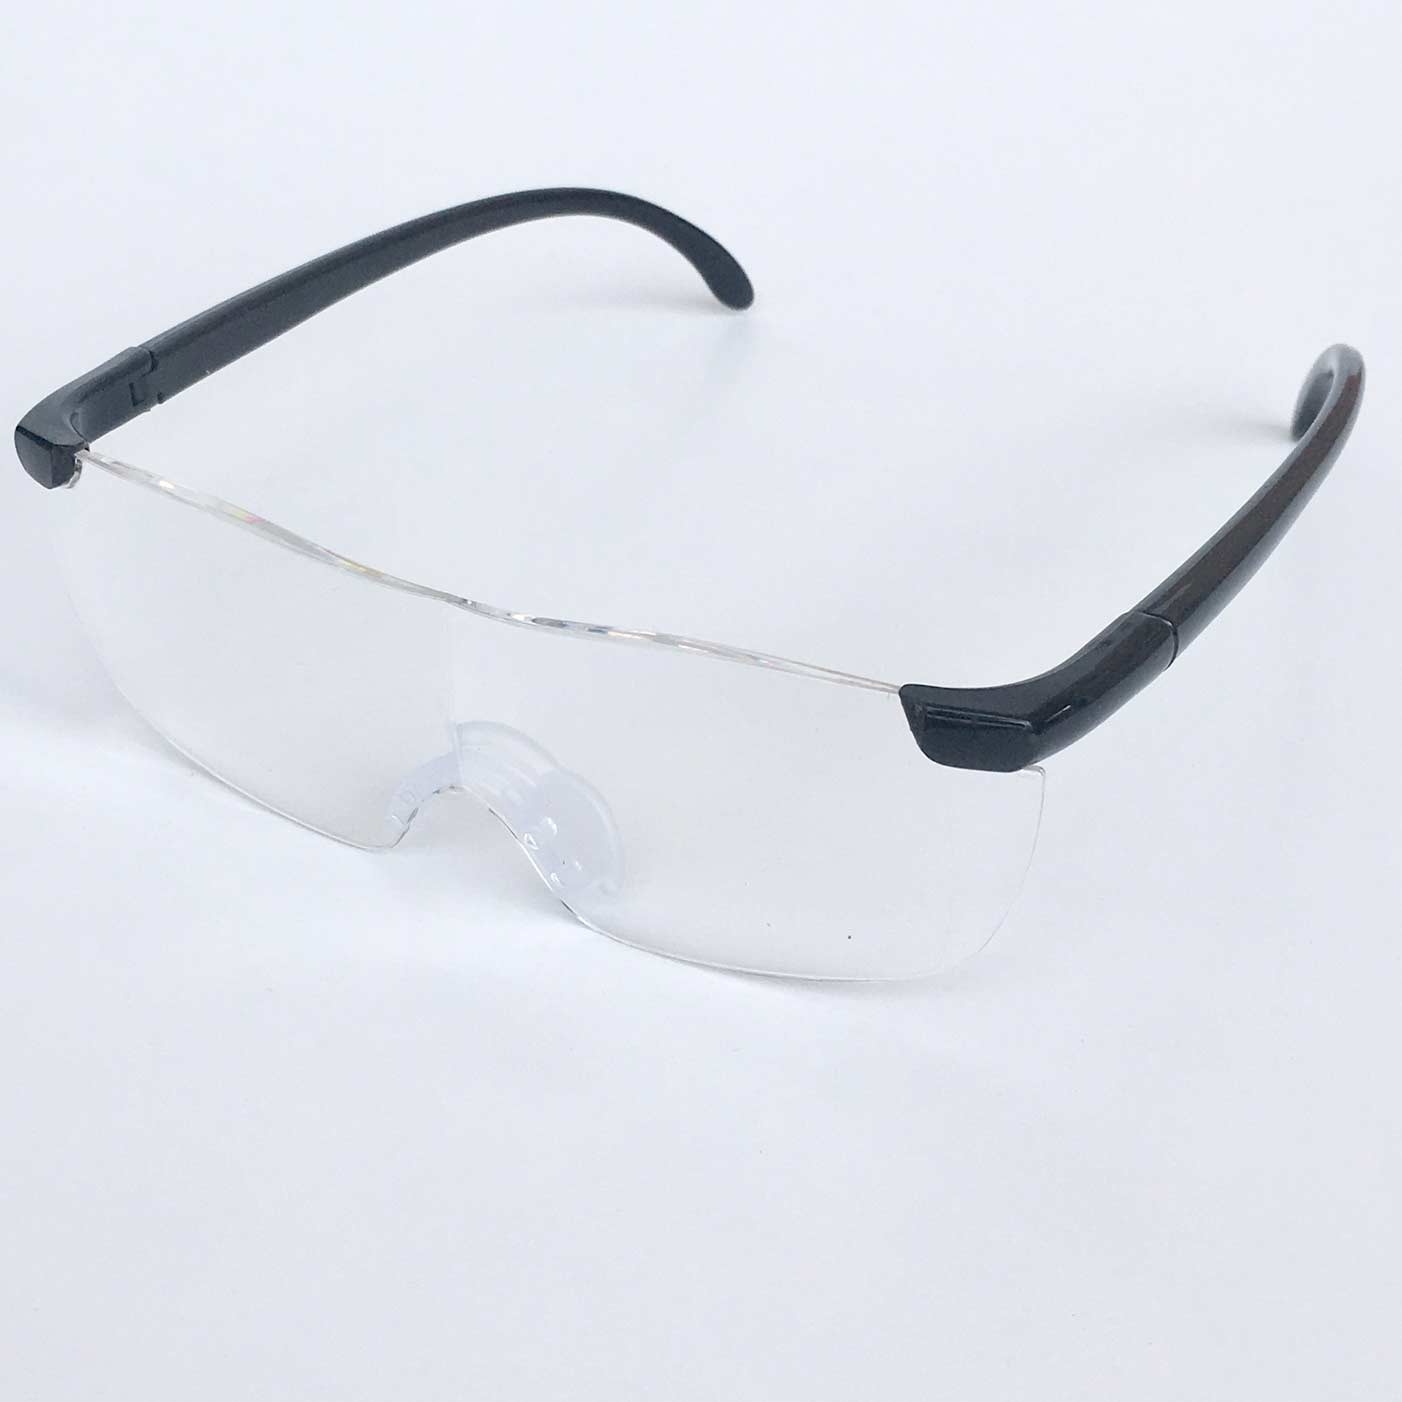 Close Viewing Magnifying Glasses, Large 1.6x Lenses, Can be worn over eyeglasses